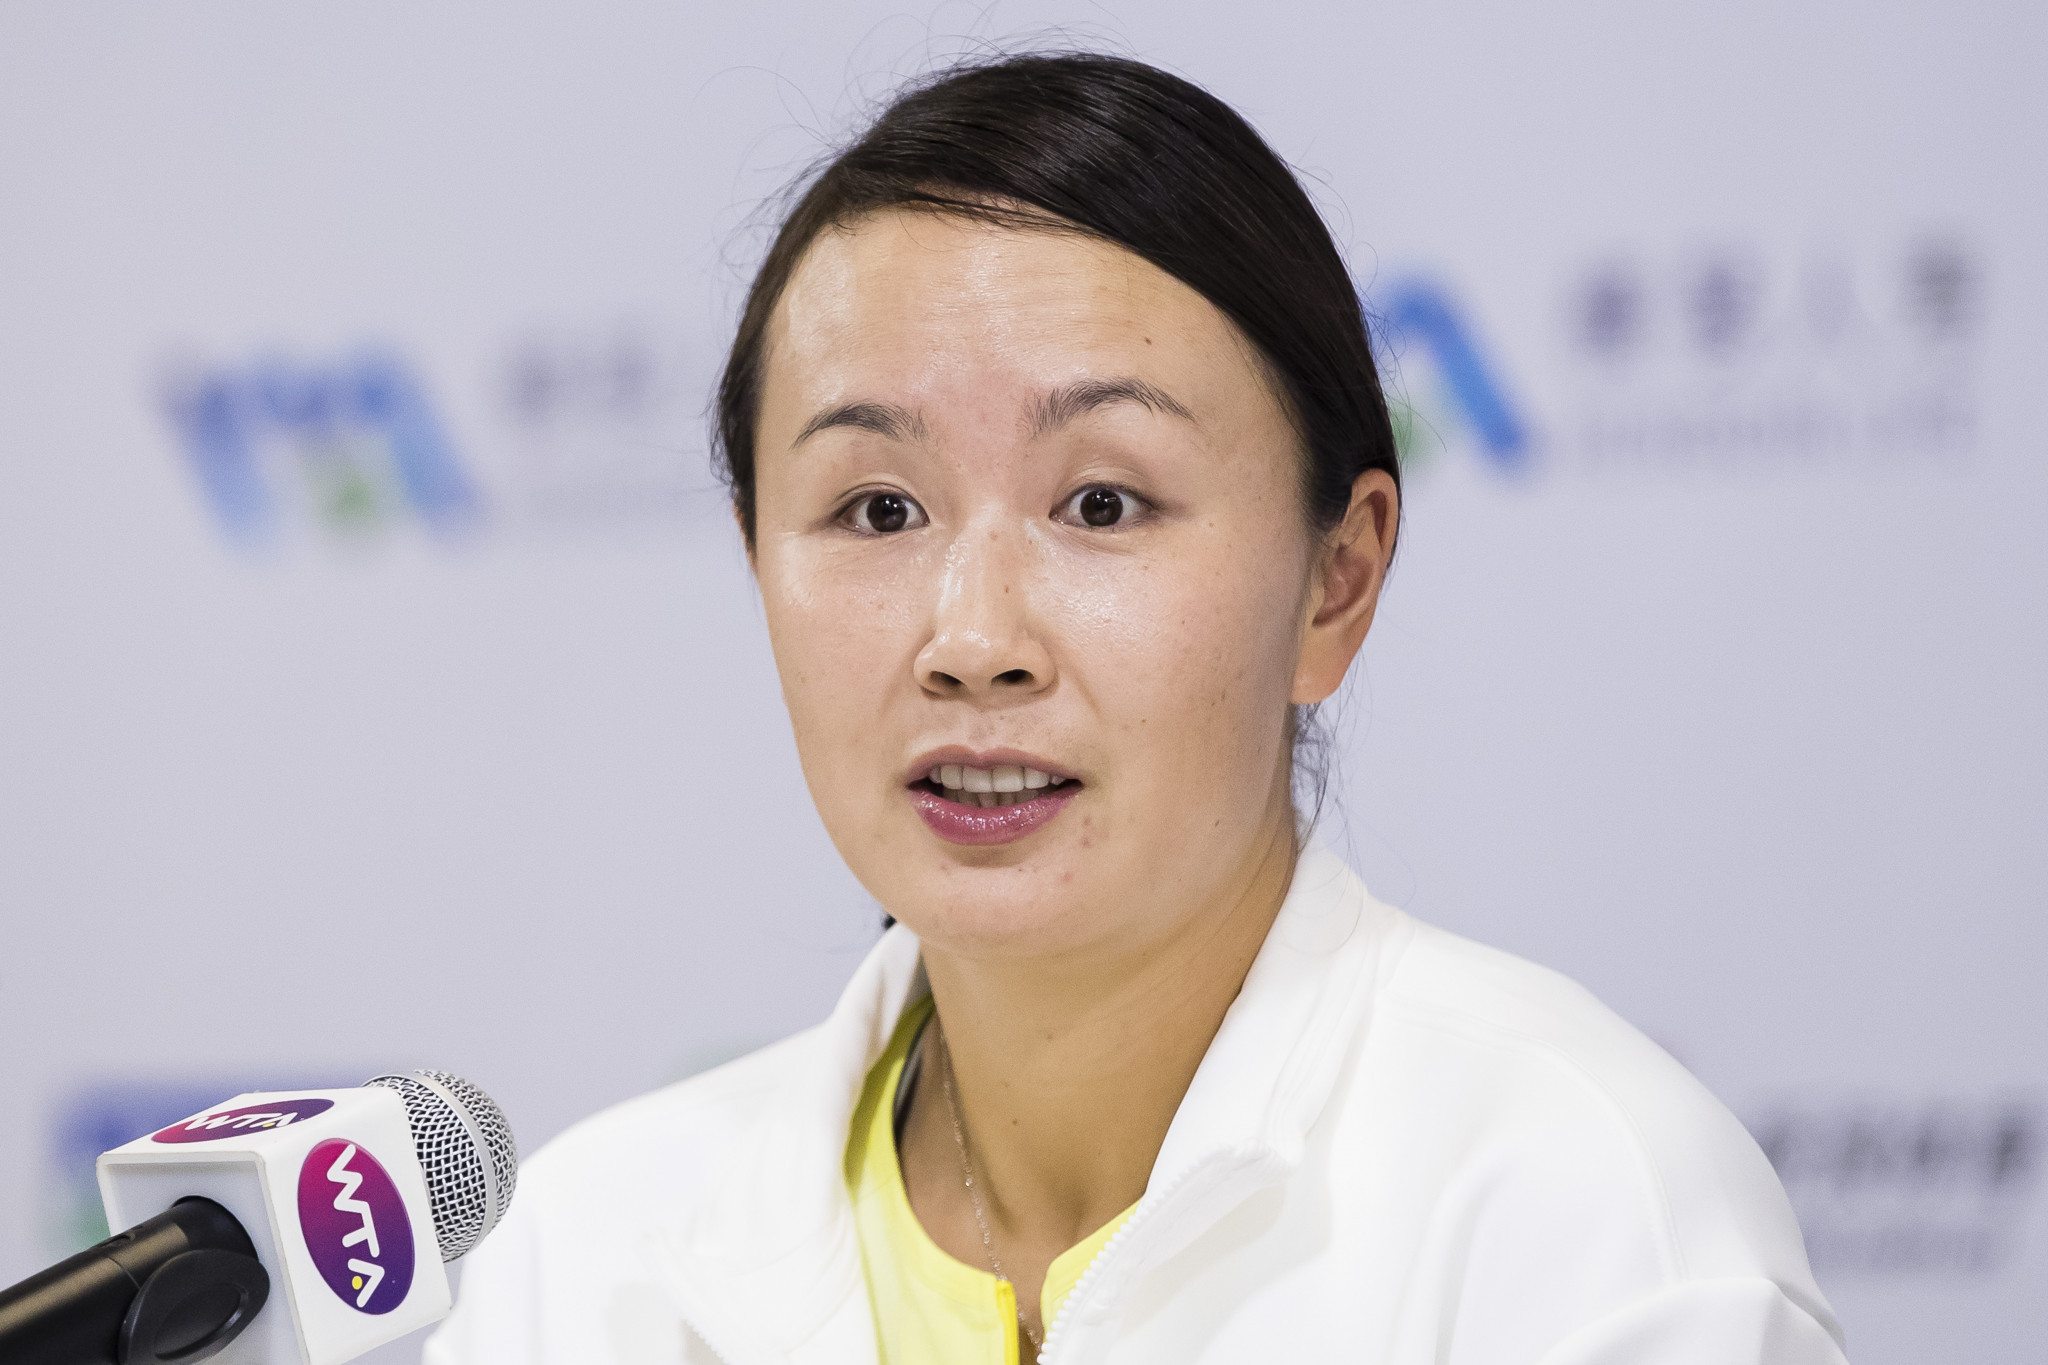 WTA threatens to pull out of 2022 Chinese tennis events due to Peng Shuai disappearance